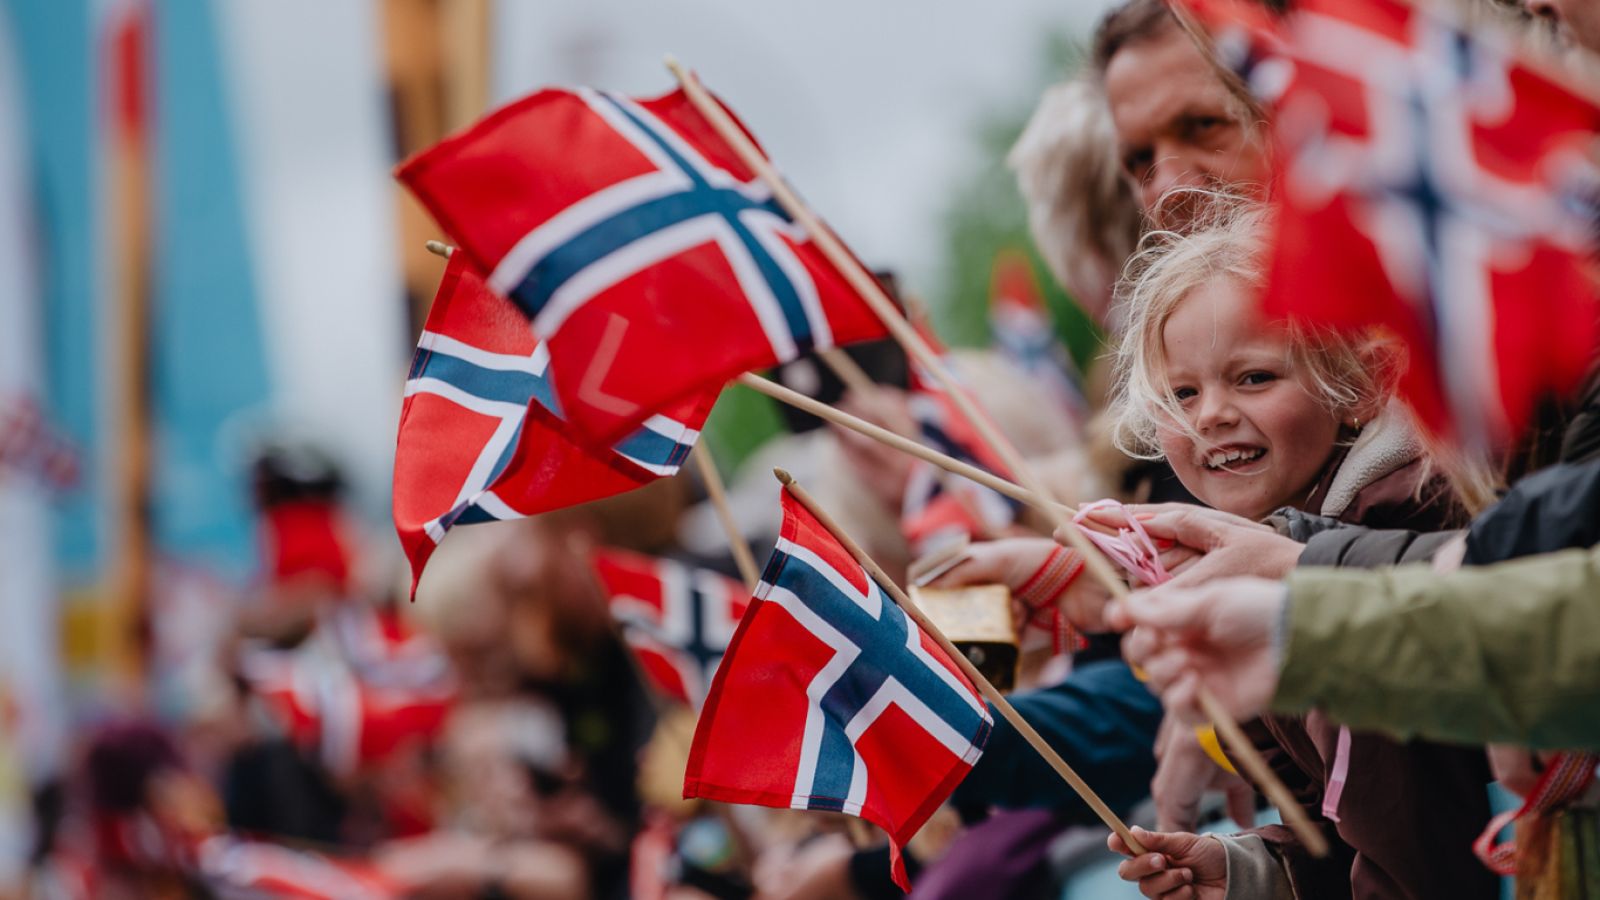 Tour of Norway 2023 will be arranged from May 24th - 29th